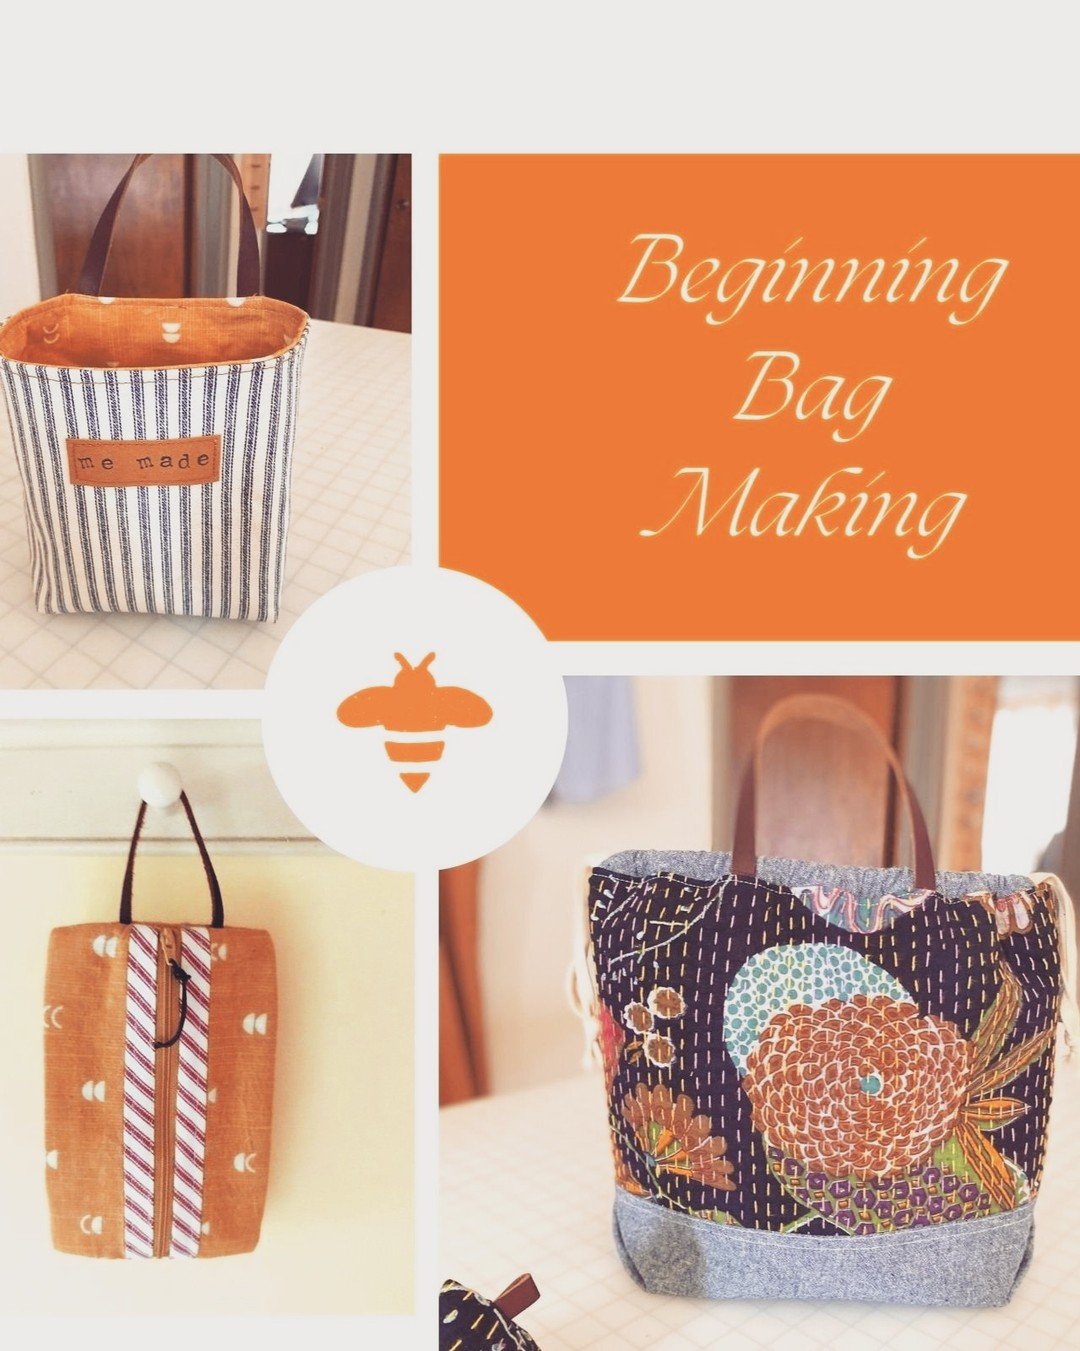 Interested in making a variety of bags? This class series explores Svetlana Sotak&rsquo;s book &ldquo;That Handmade Touch&rdquo; by making three of the easier bags and pouches detailed in its pages. You will make a pouch, a handy wall pocket, and a s